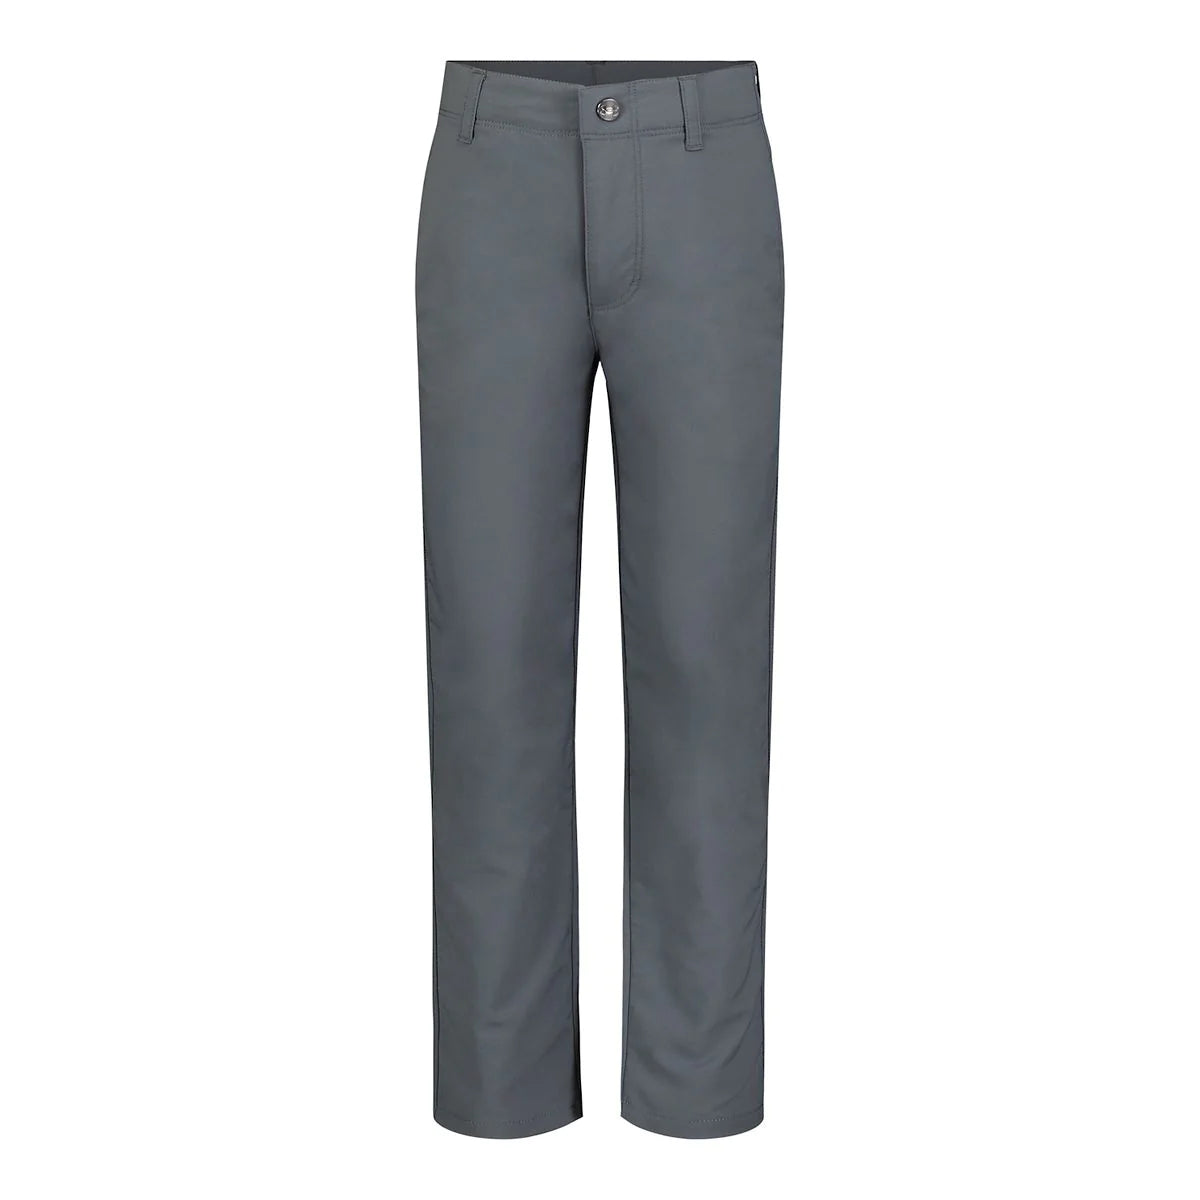 UA Boys Match Play Tapered Pant- Pitch Gray